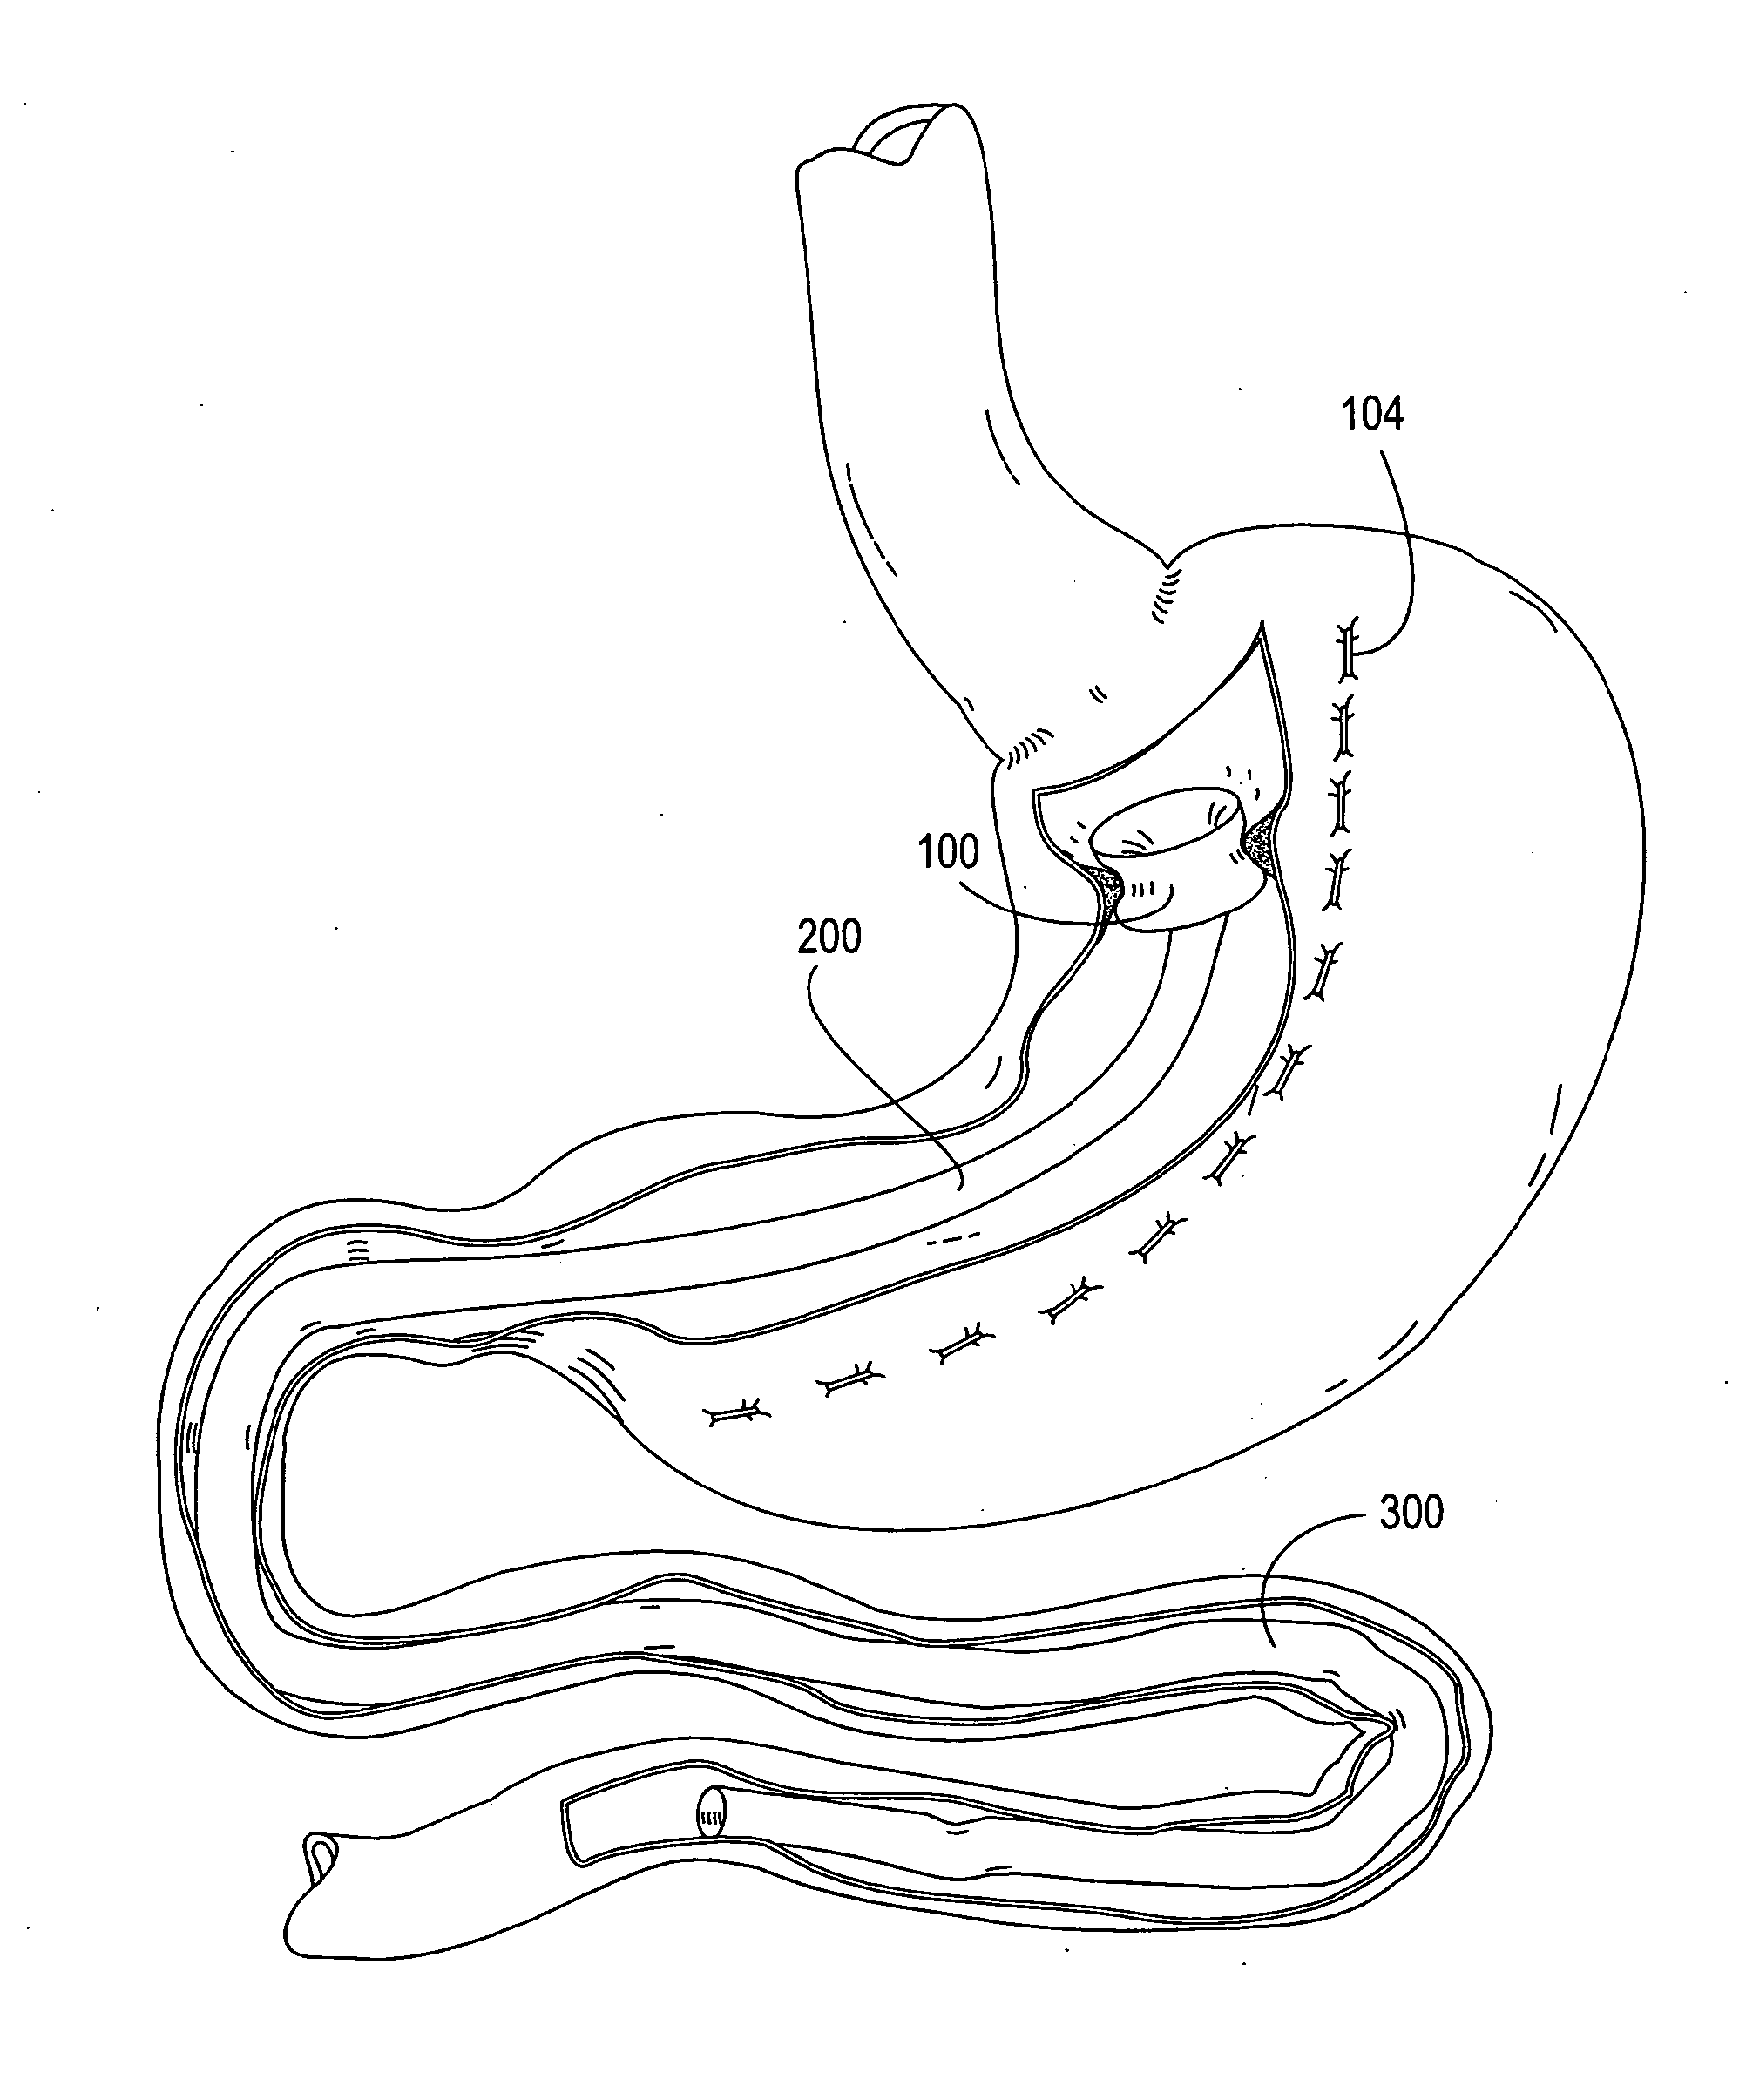 Apparatus and methods for treatment of morbid obesity